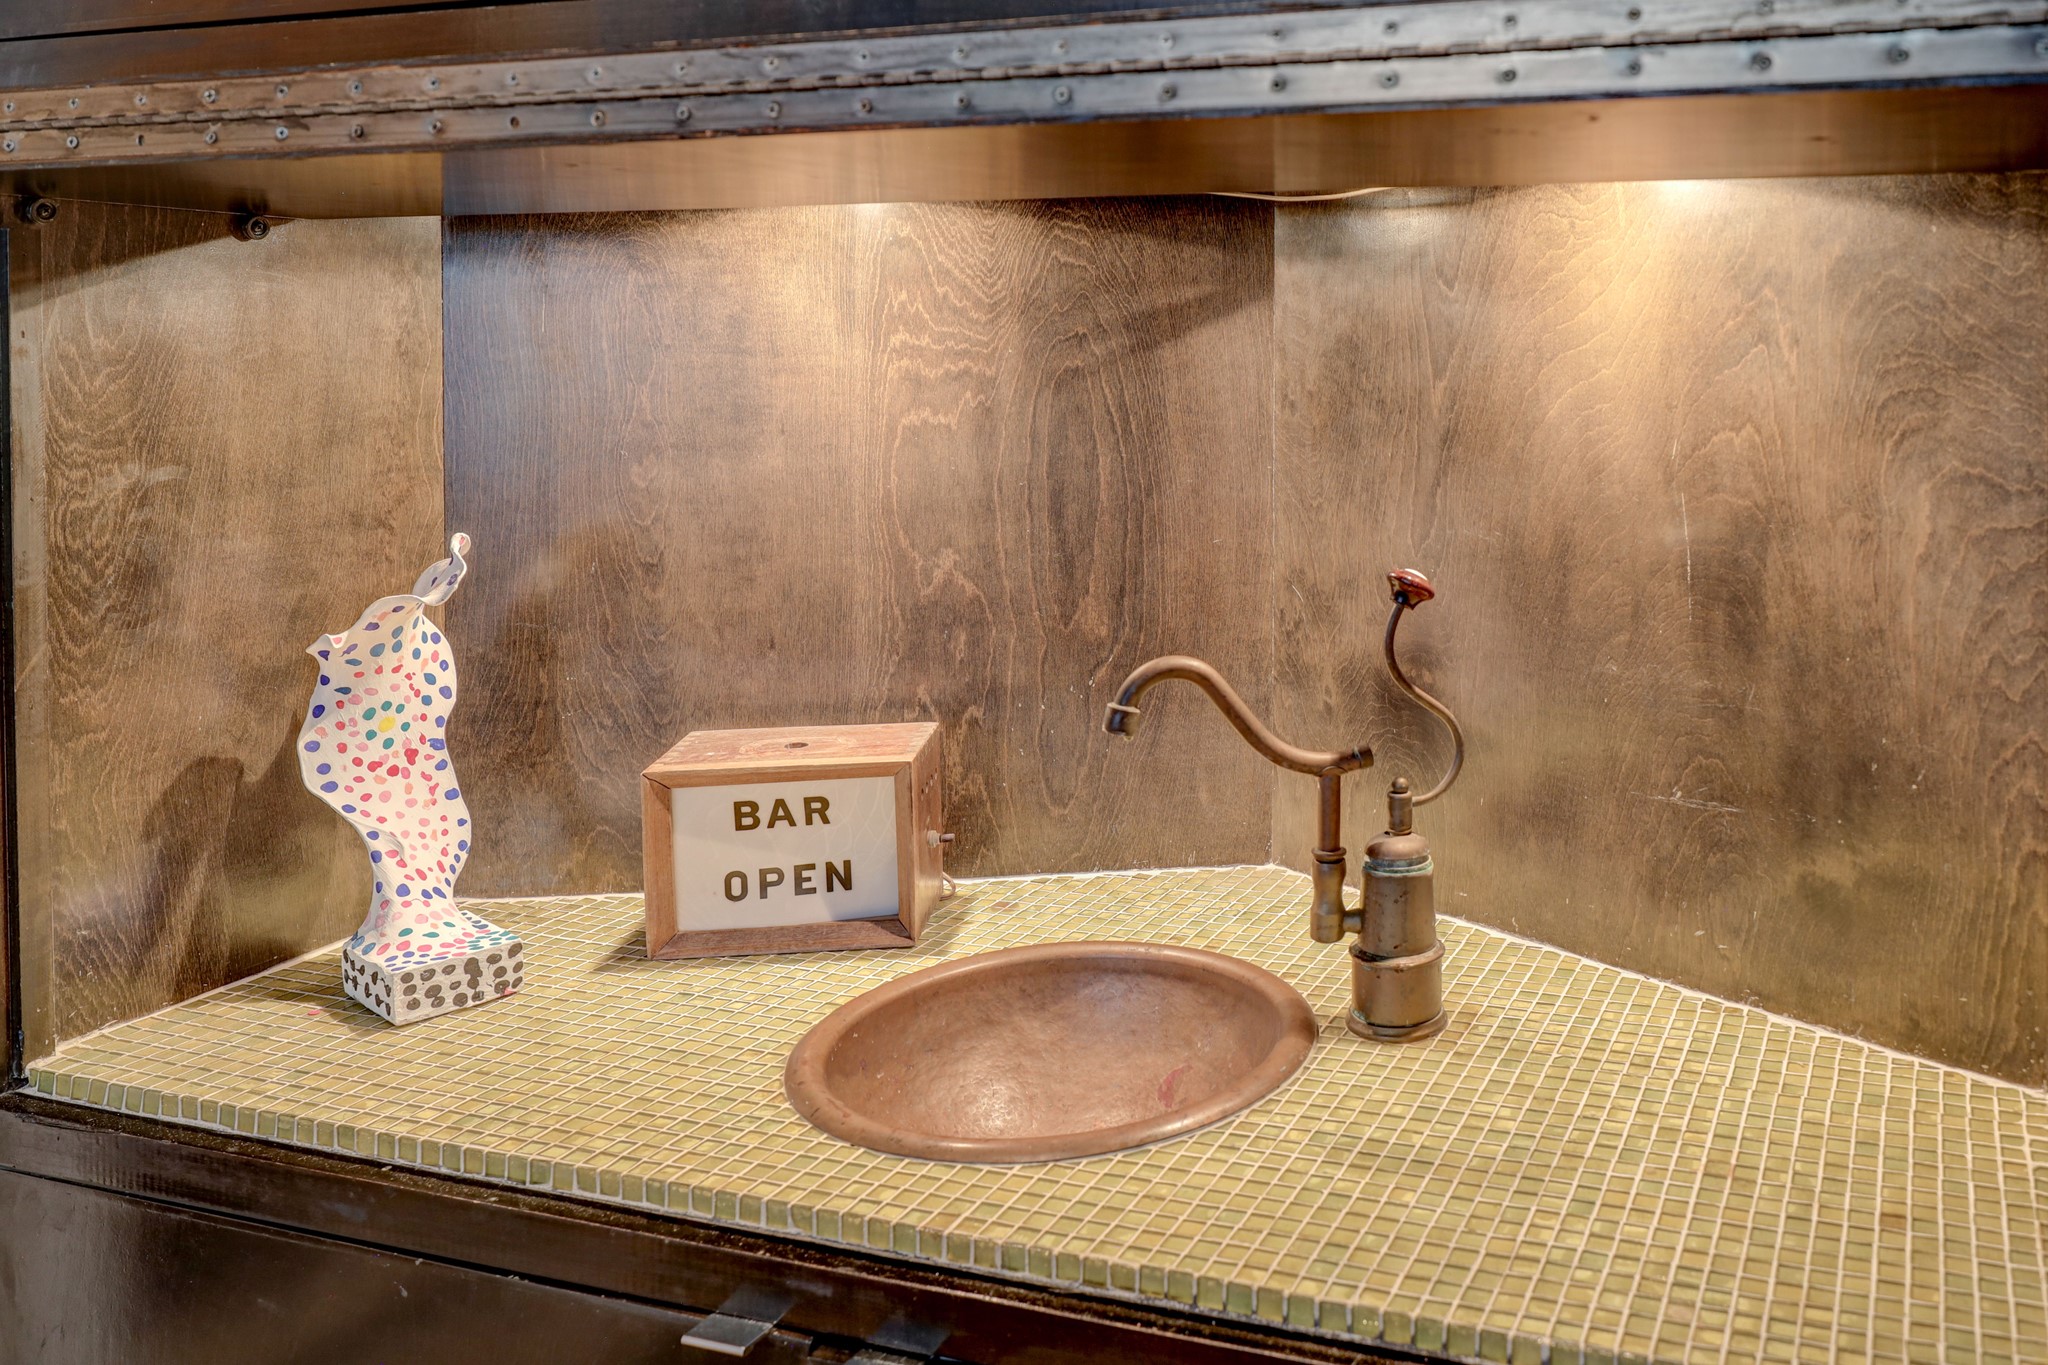 Wet bar with vintage copper bar sink and faucet.